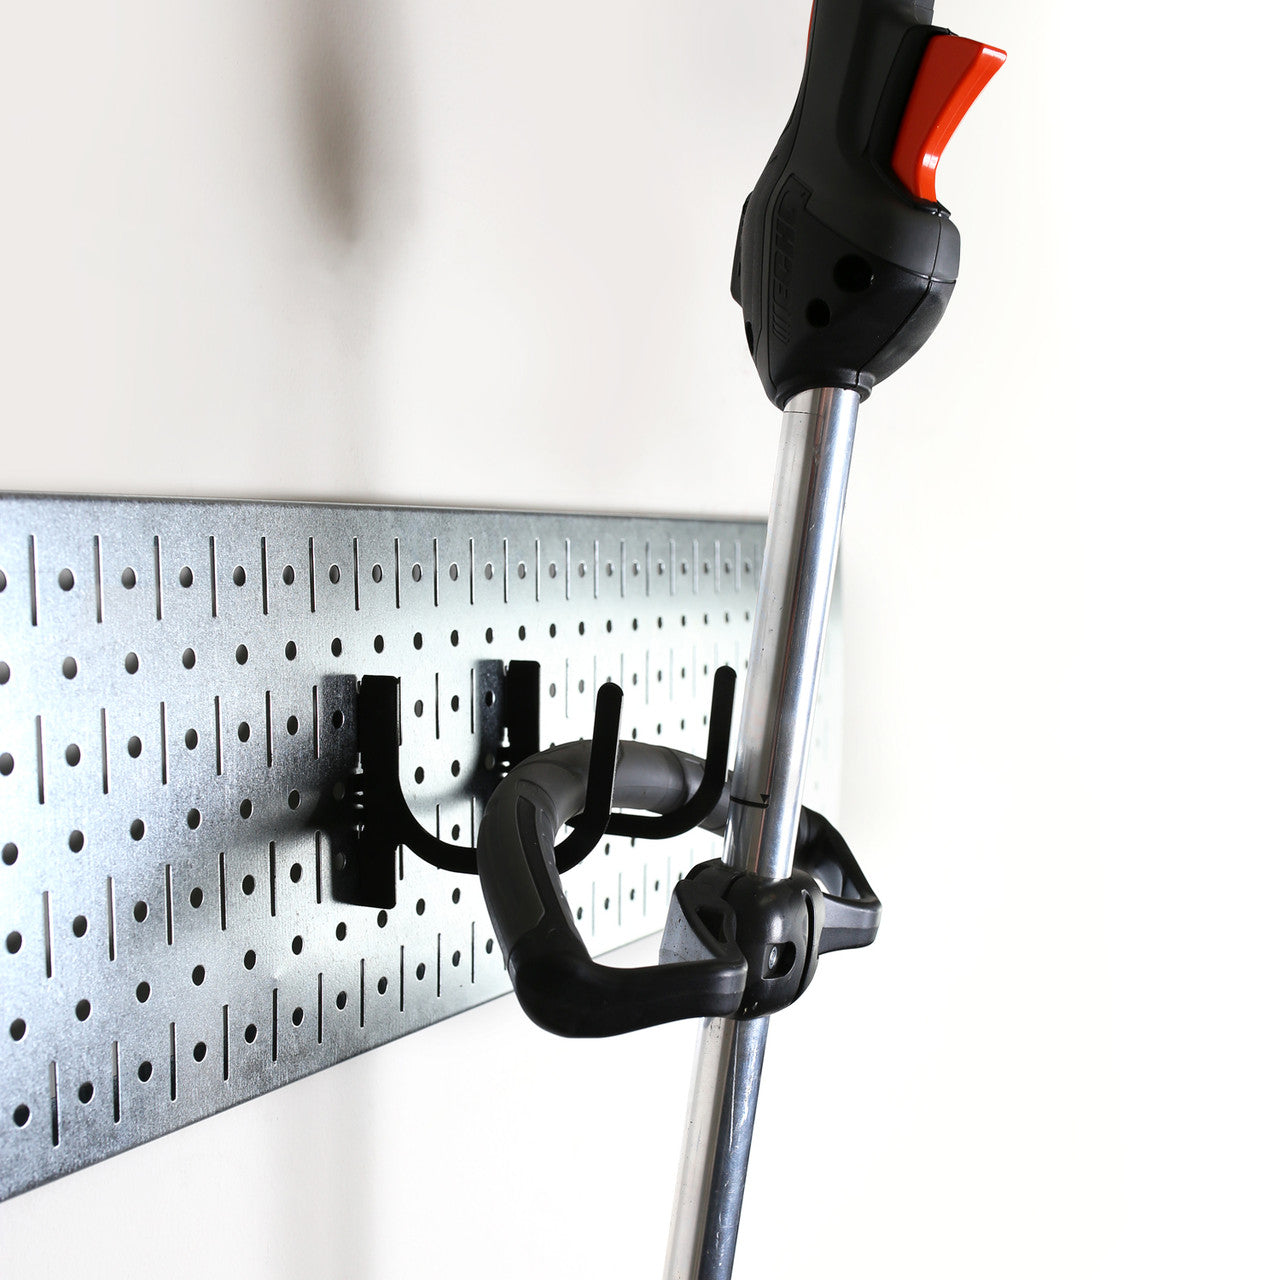 Best Hook for Hanging Weed Eaters, Trimmers, Edgers and Lawn Equipment on Pegboard